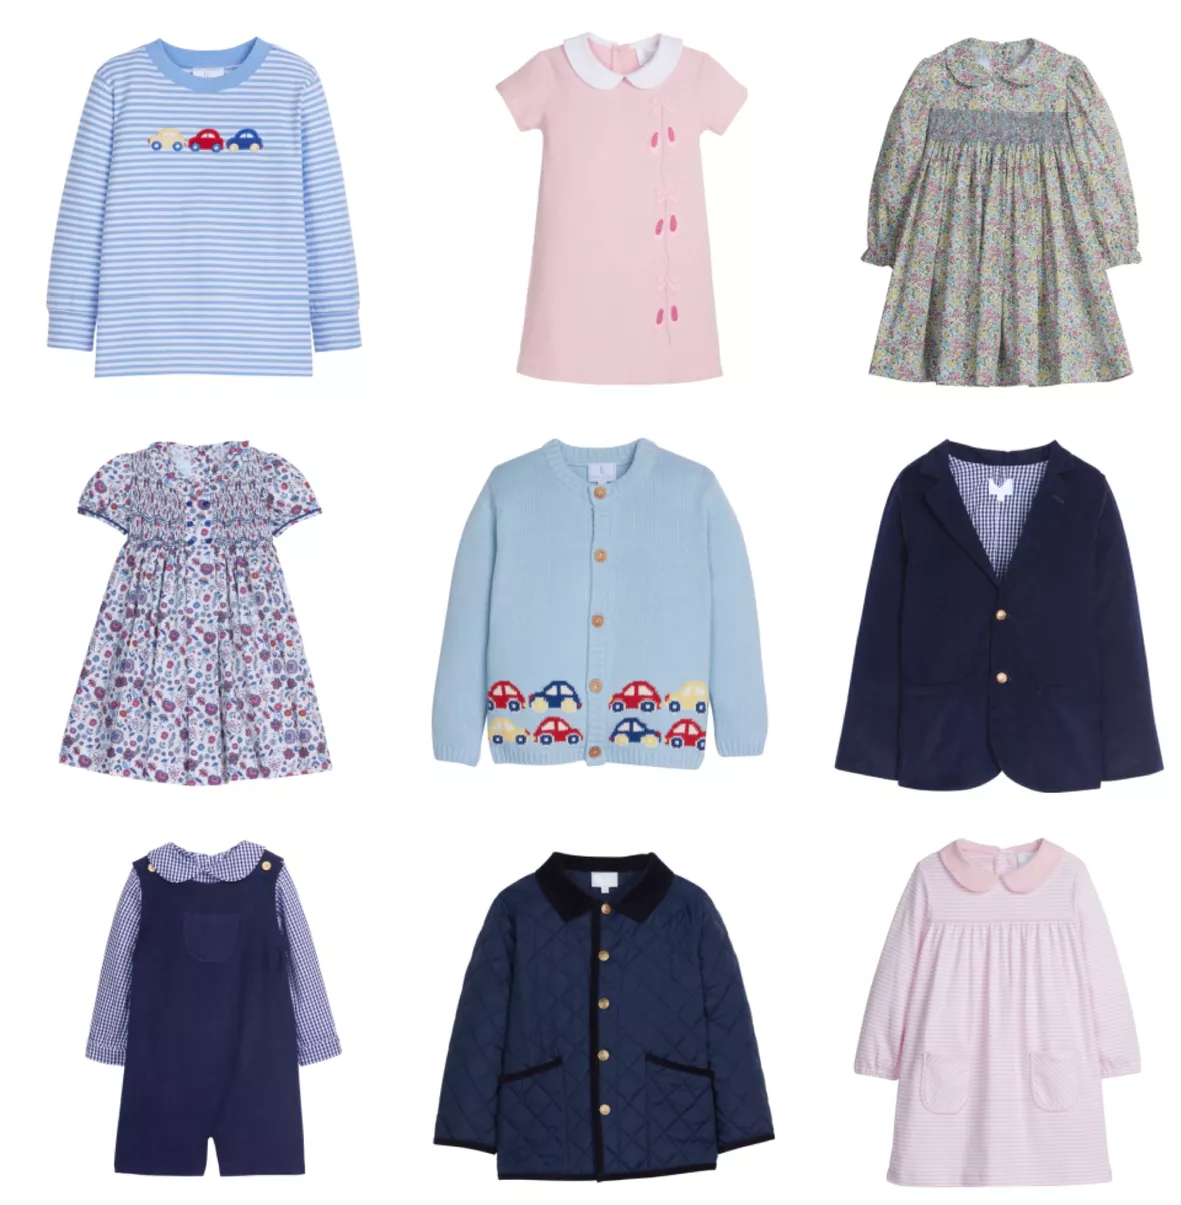 Teen Girl Clothing Preppy, Preppy Clothes Girls